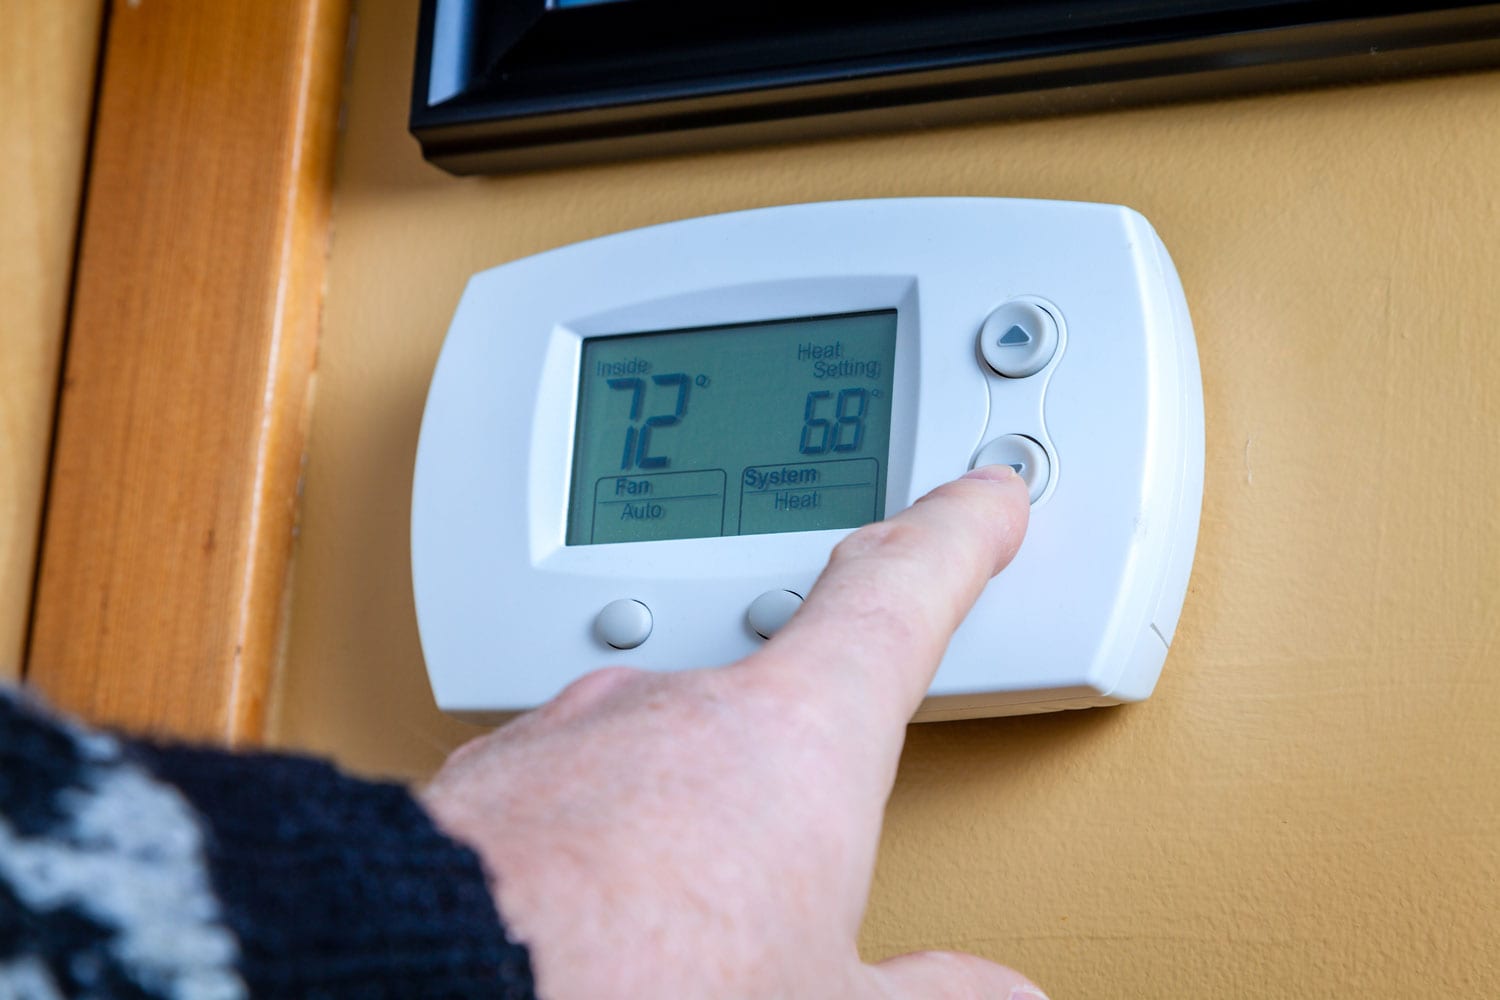 Setting the living room temperature to a comfortable level using the thermostat